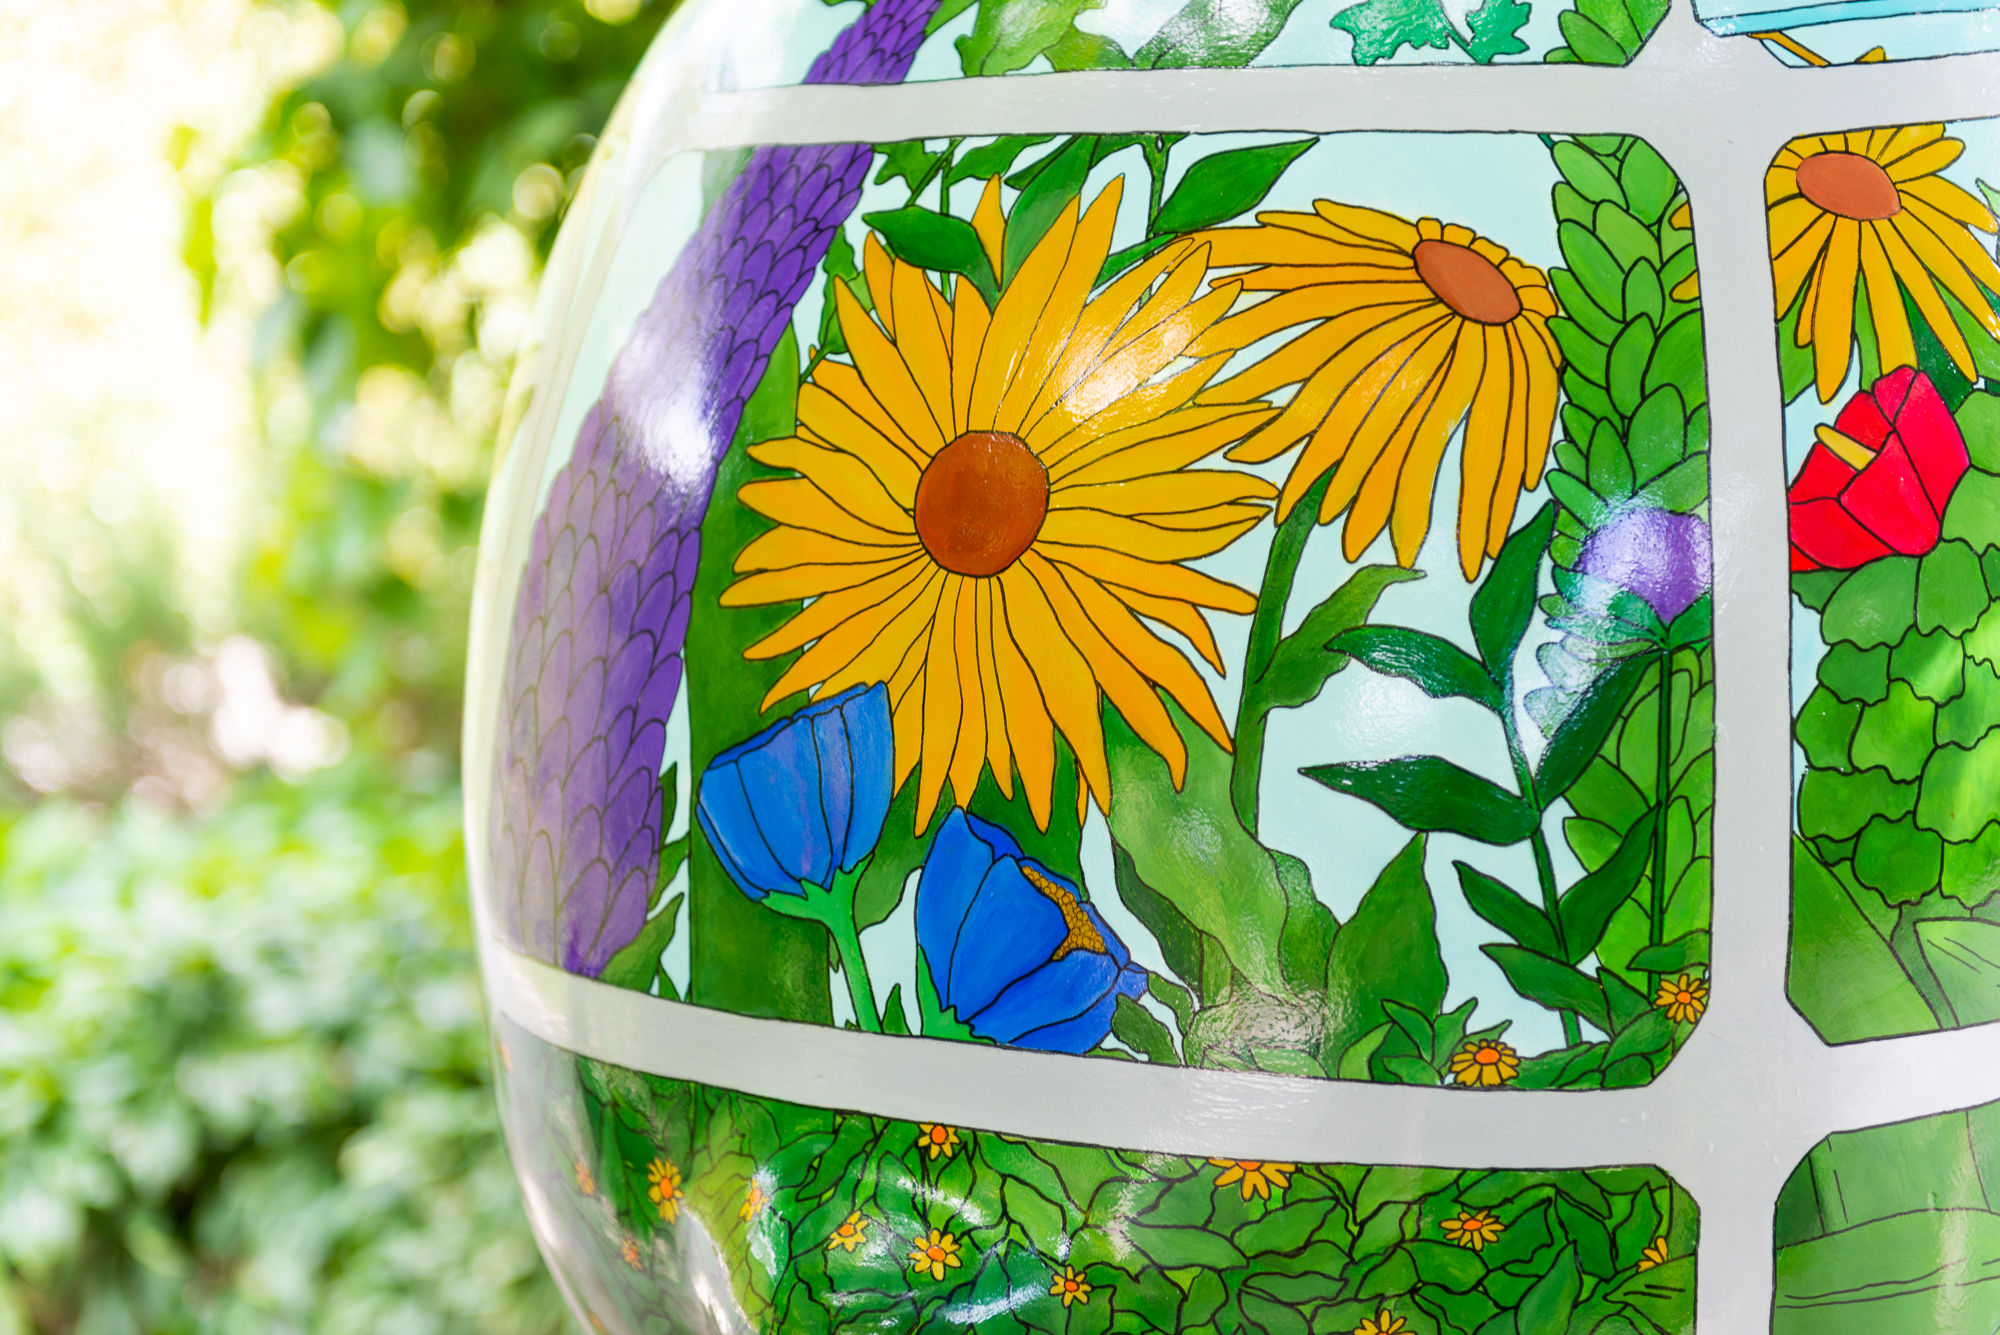 'Blooming Greenhouse' by Leah Hayler. Sponsored by St Luke's Hospice Plymouth - Image 13 of 13